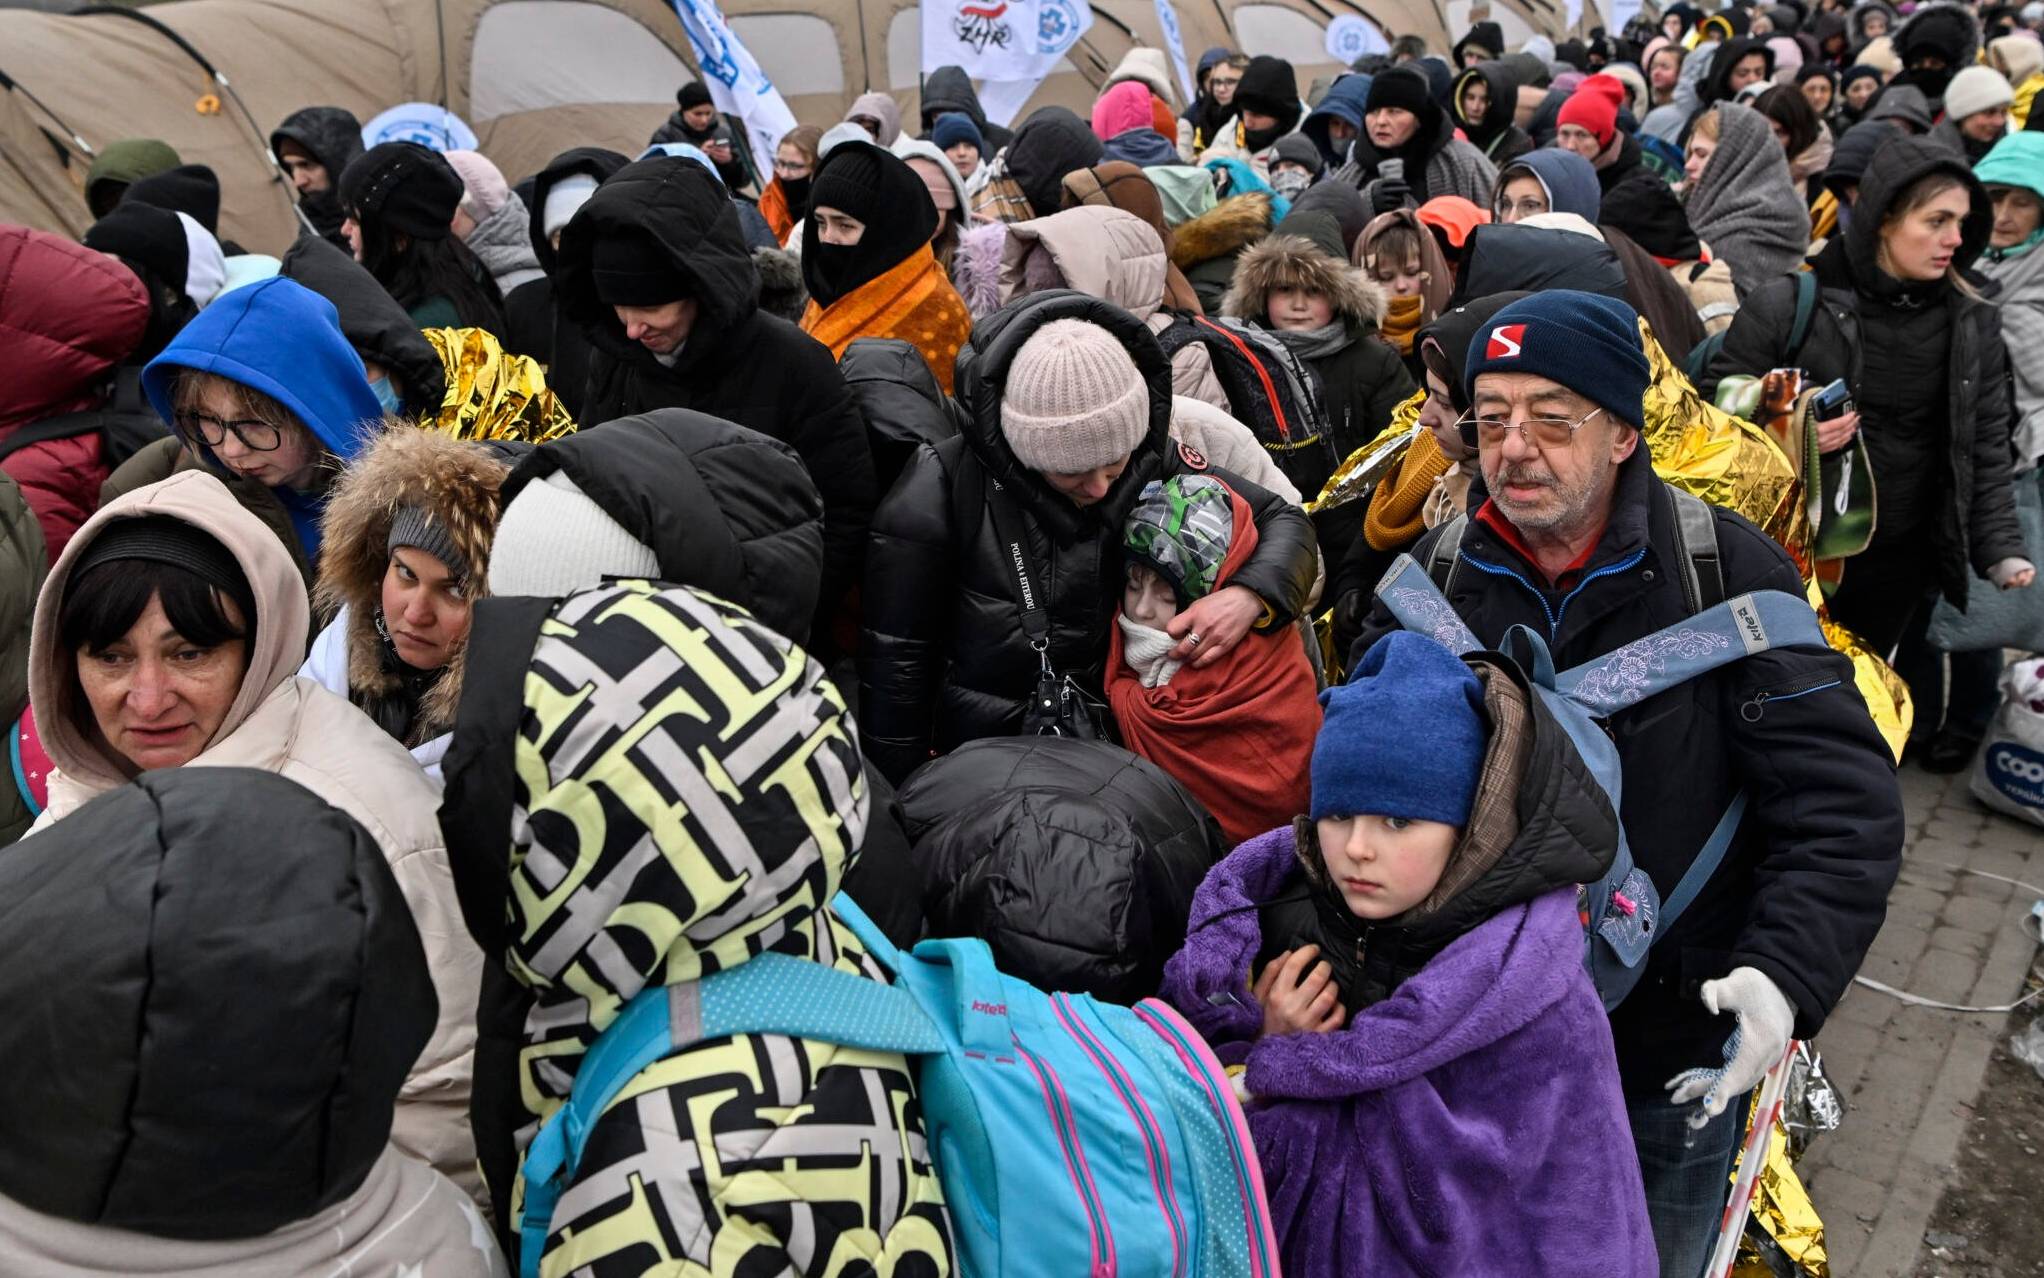 Refugees stand in line in the cold as they wait to be transferred to a train station after crossing the Ukrainian border into Poland, at the Medyka border crossing in Poland, on March 7, 2022. - More than 1.5 million people have fled Ukraine since the start of the Russian invasion, according to the latest UN data on March 6, 2022. (Photo by Louisa GOULIAMAKI / AFP)